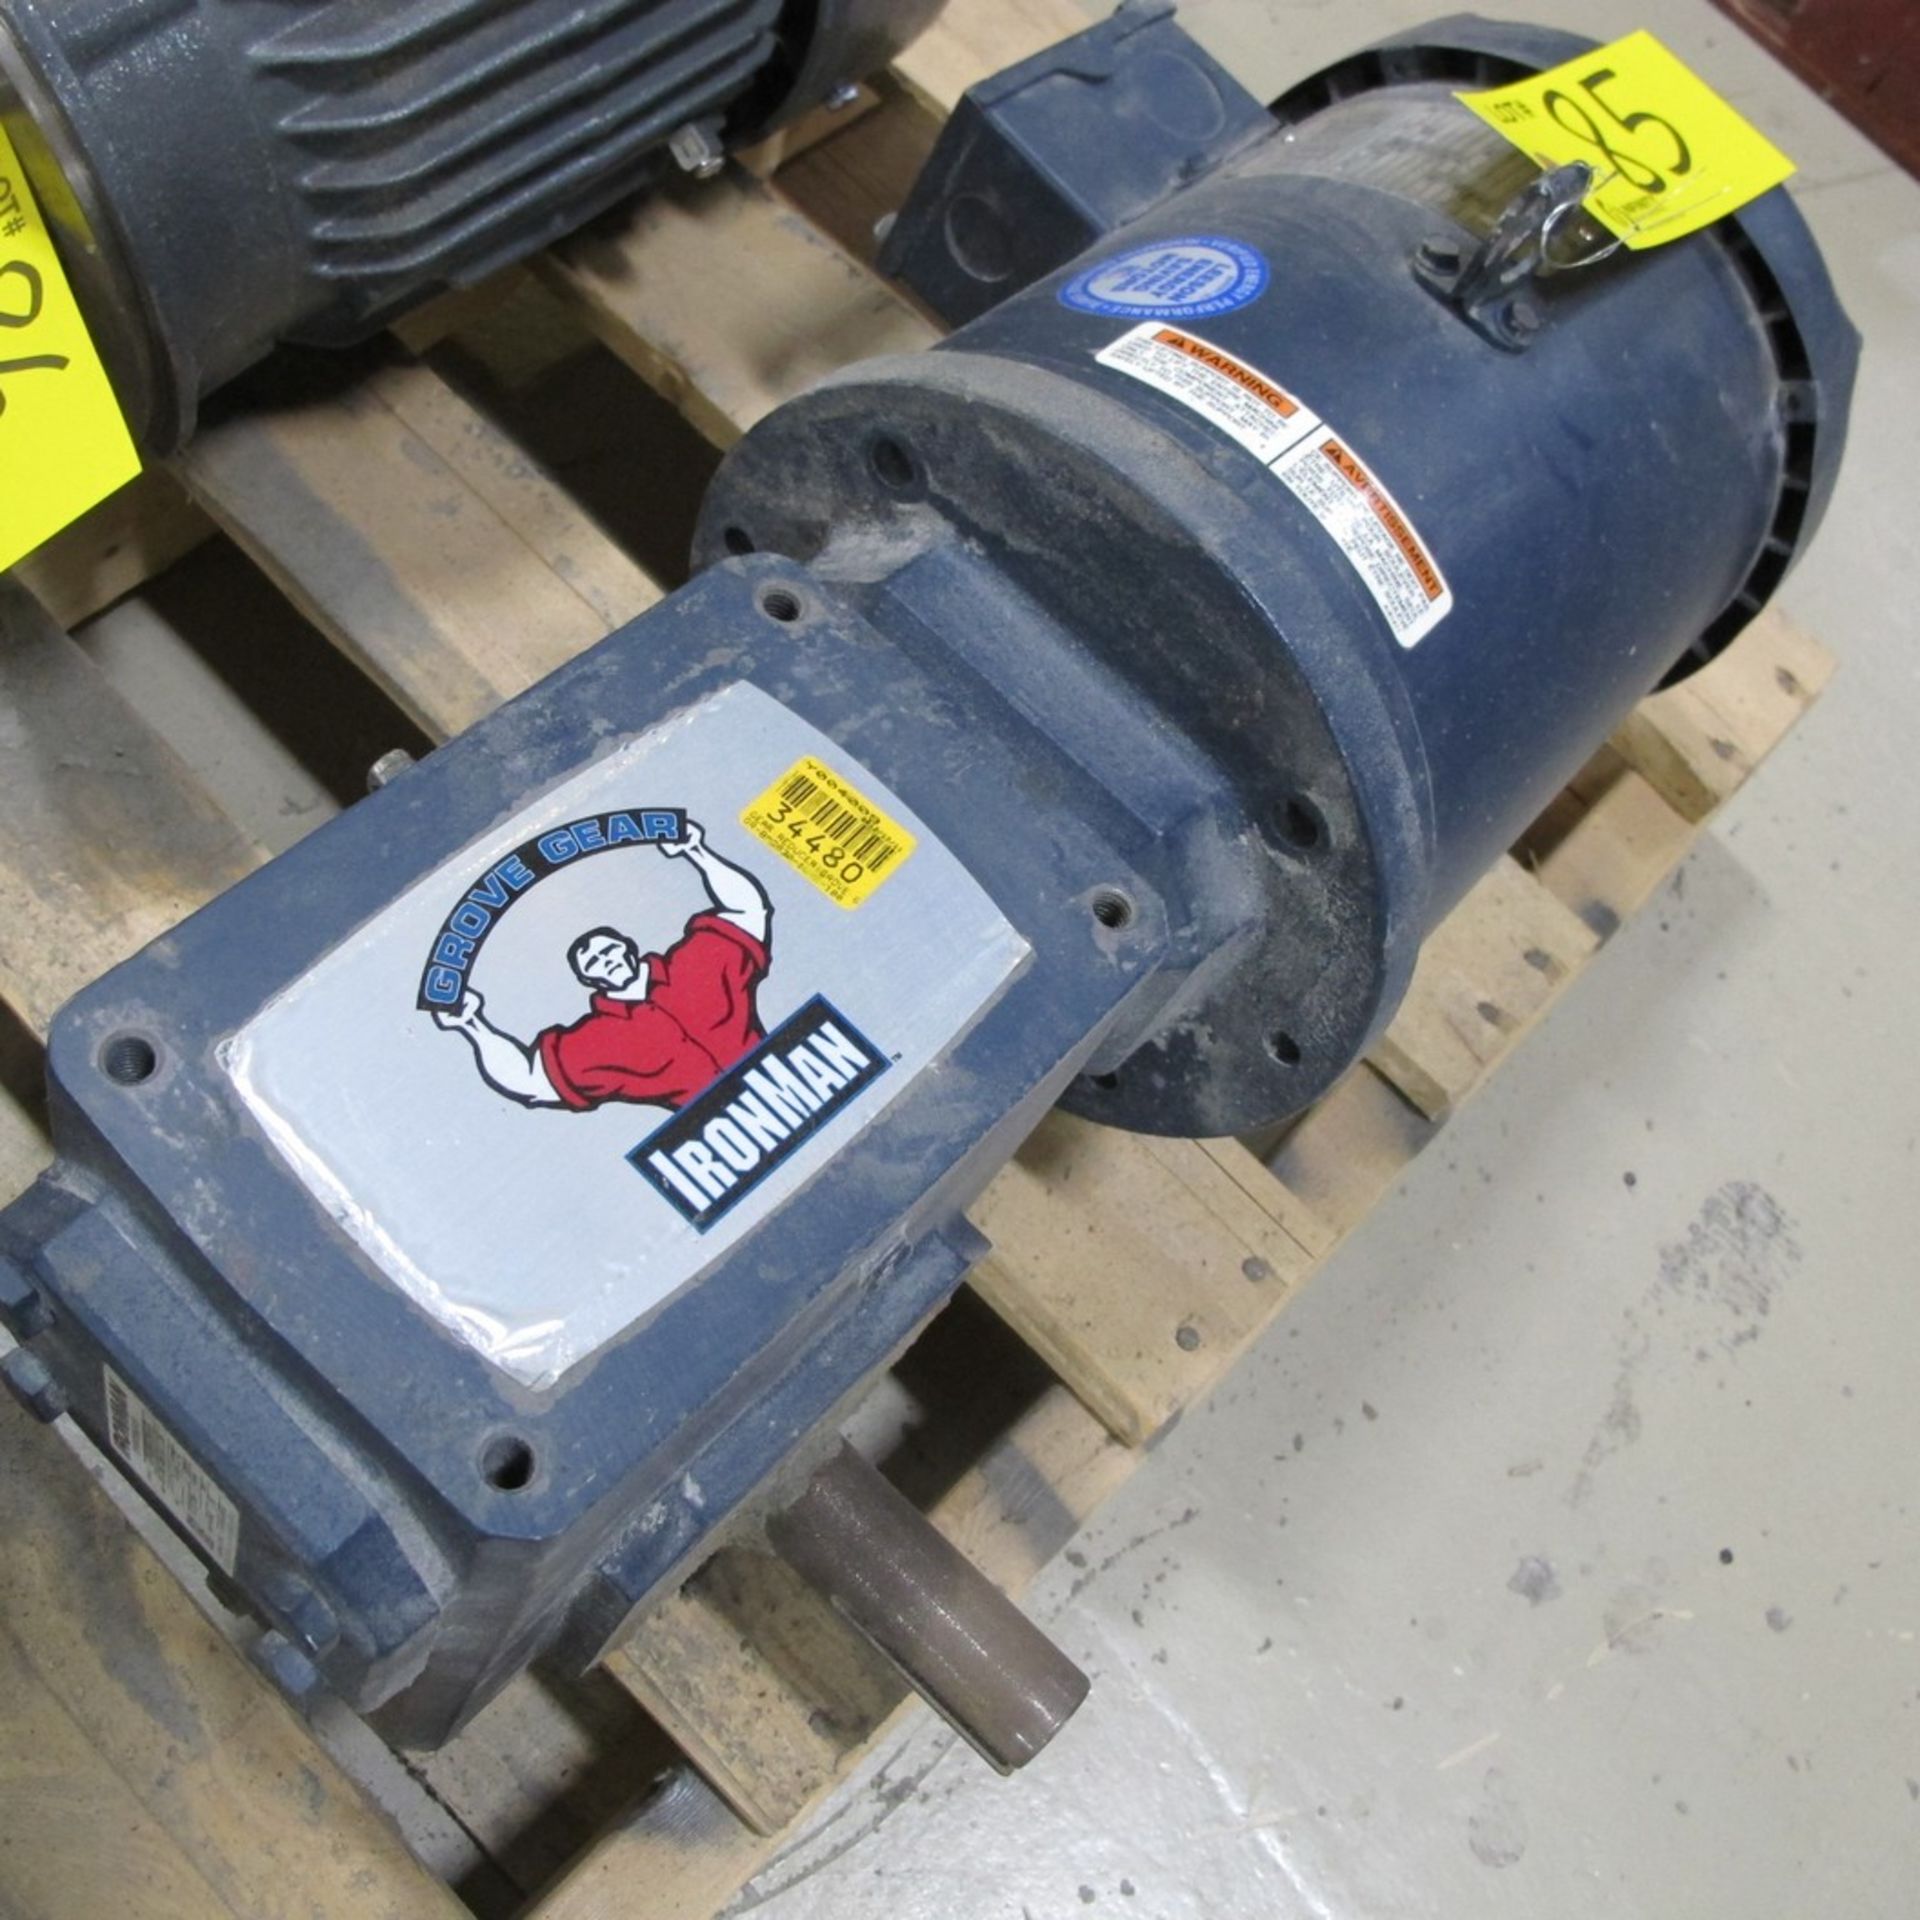 LEESON ELECTRIC MOTOR, 3.5HP, 460V, 1,760/2,570 RPM, 182TC FRAME W/ IRONMAN/GROVE GEARBOX/REDUCER 15